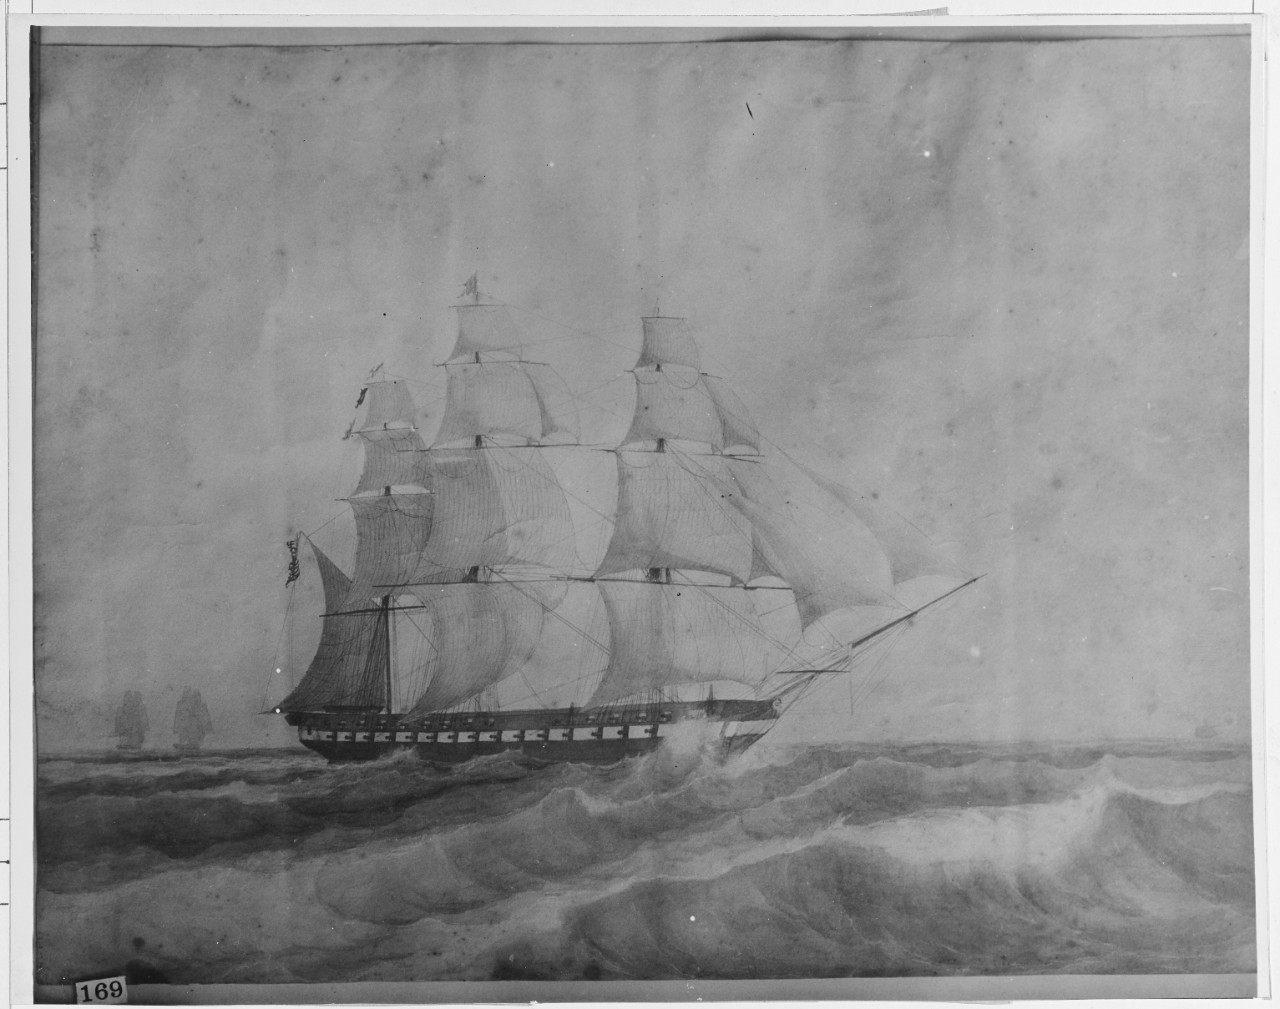 Watercolor of an early American frigate